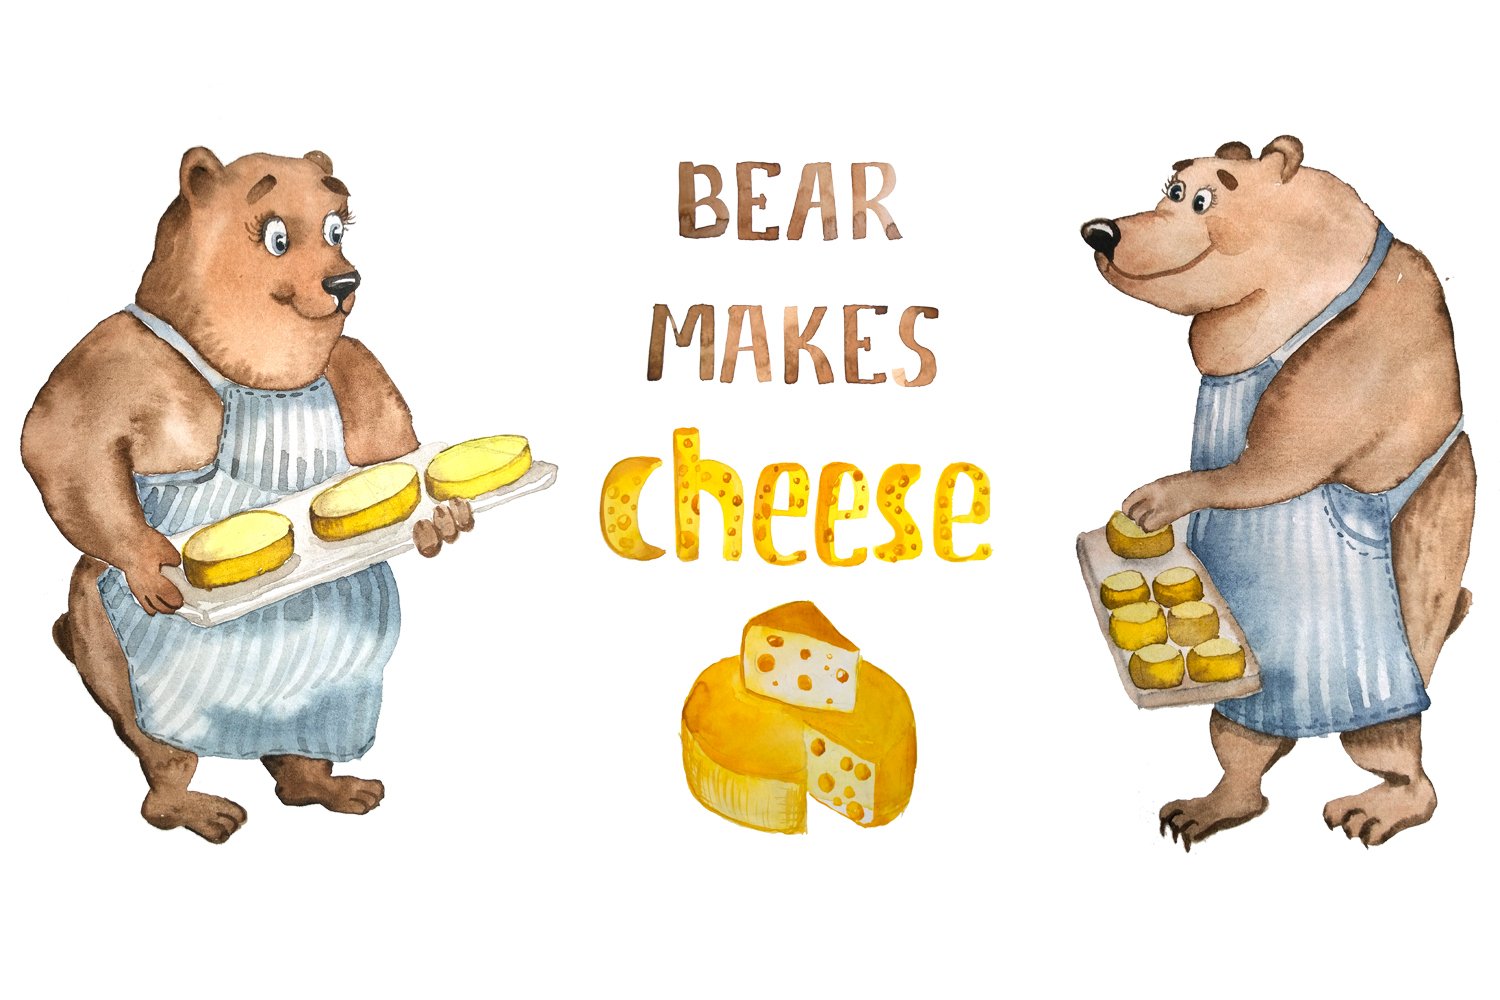 Watercolor image of bears making cheese.